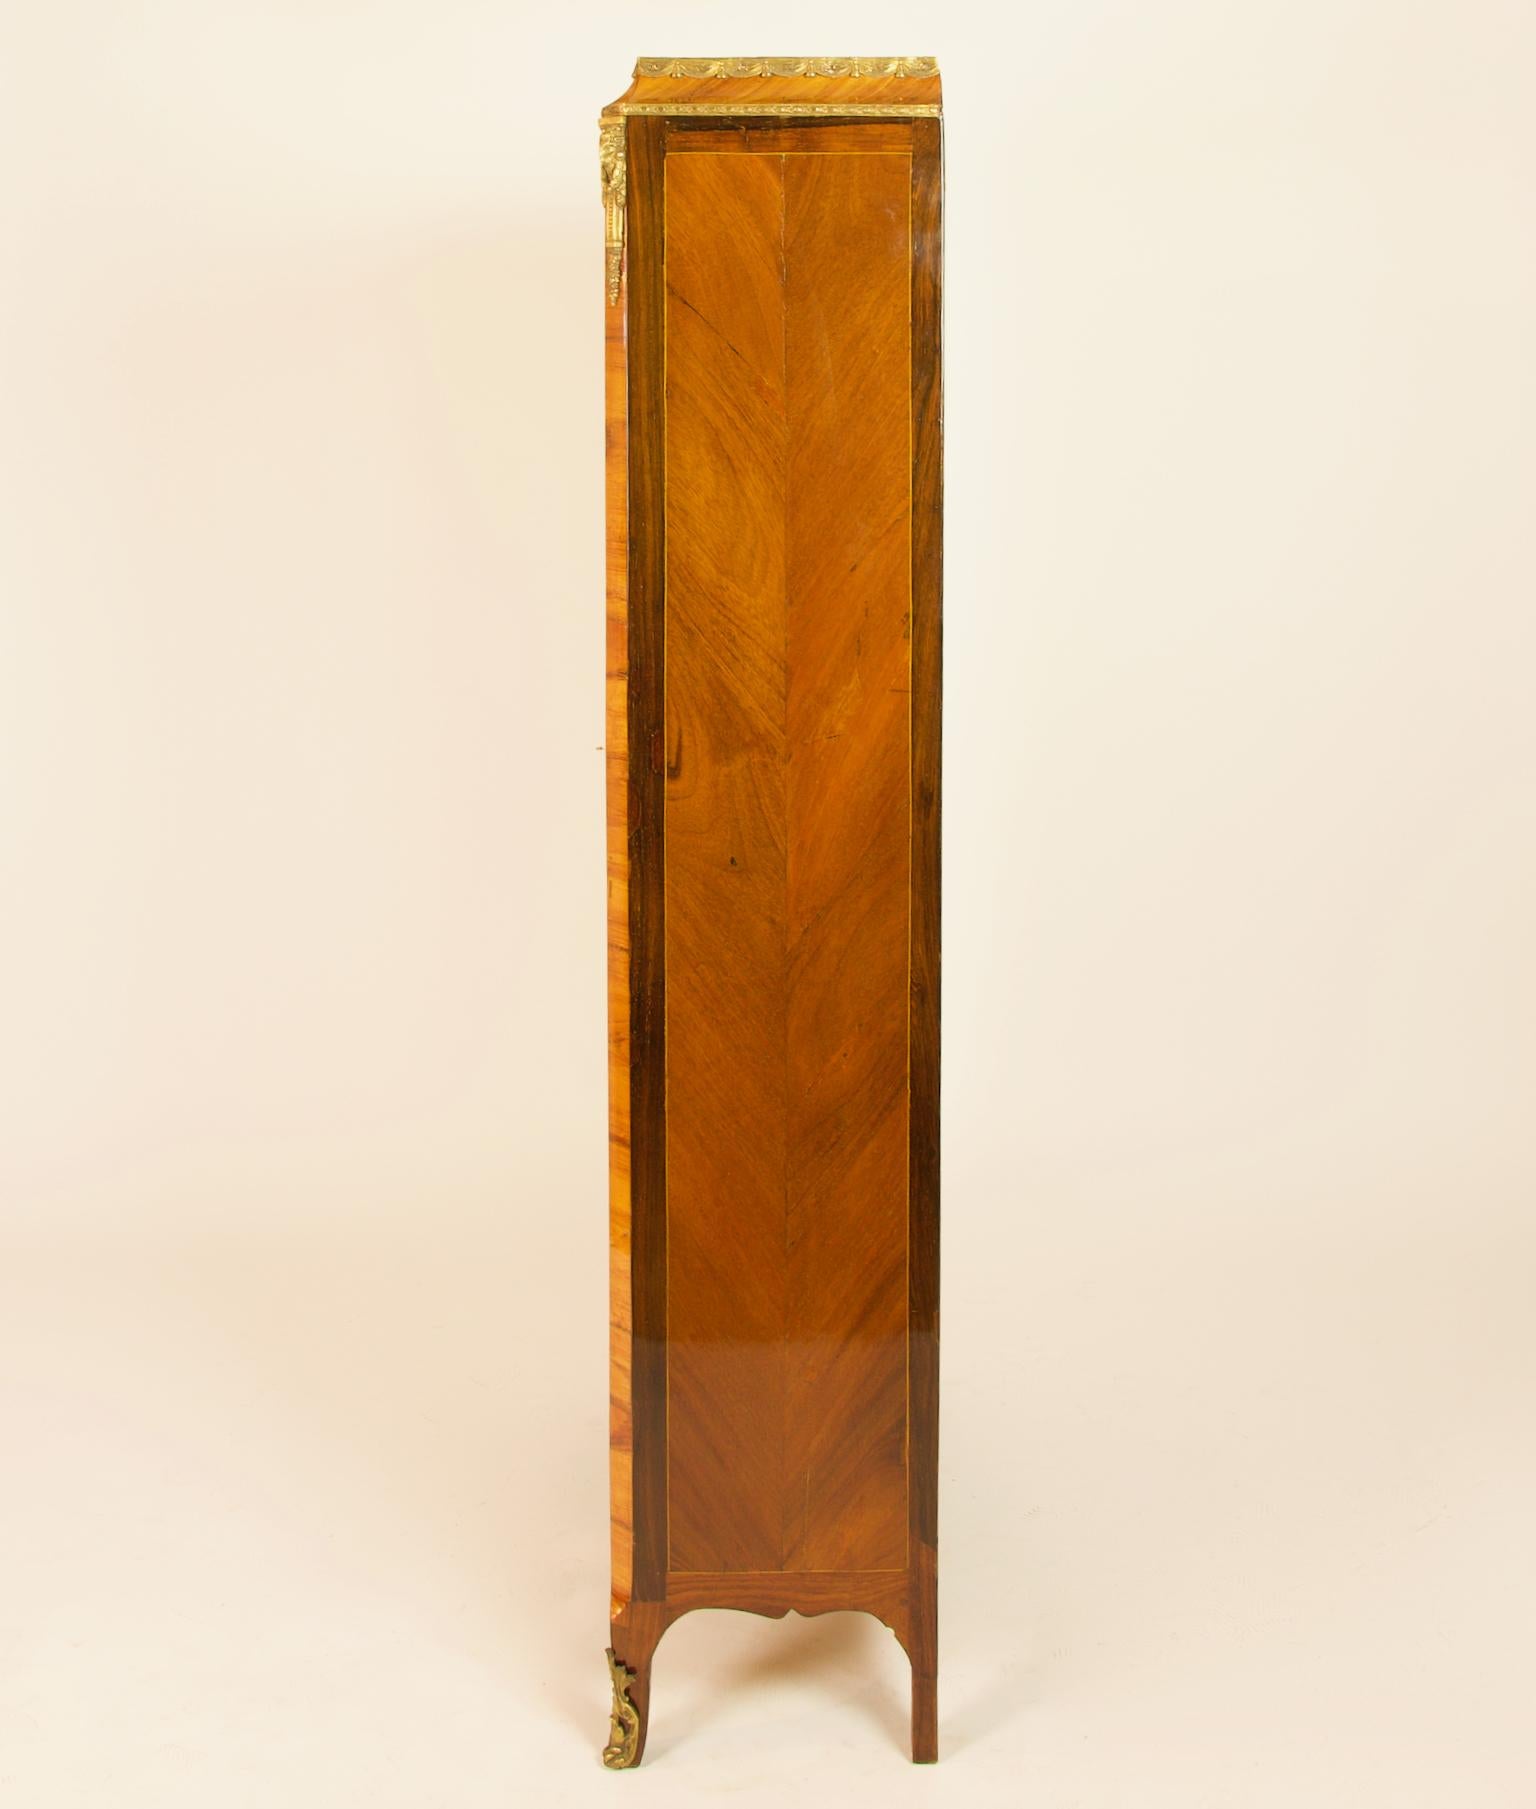 Mid-18th Century French 18th Century Louis XV Transition Period Cube Marquetry Vitrine or Library For Sale